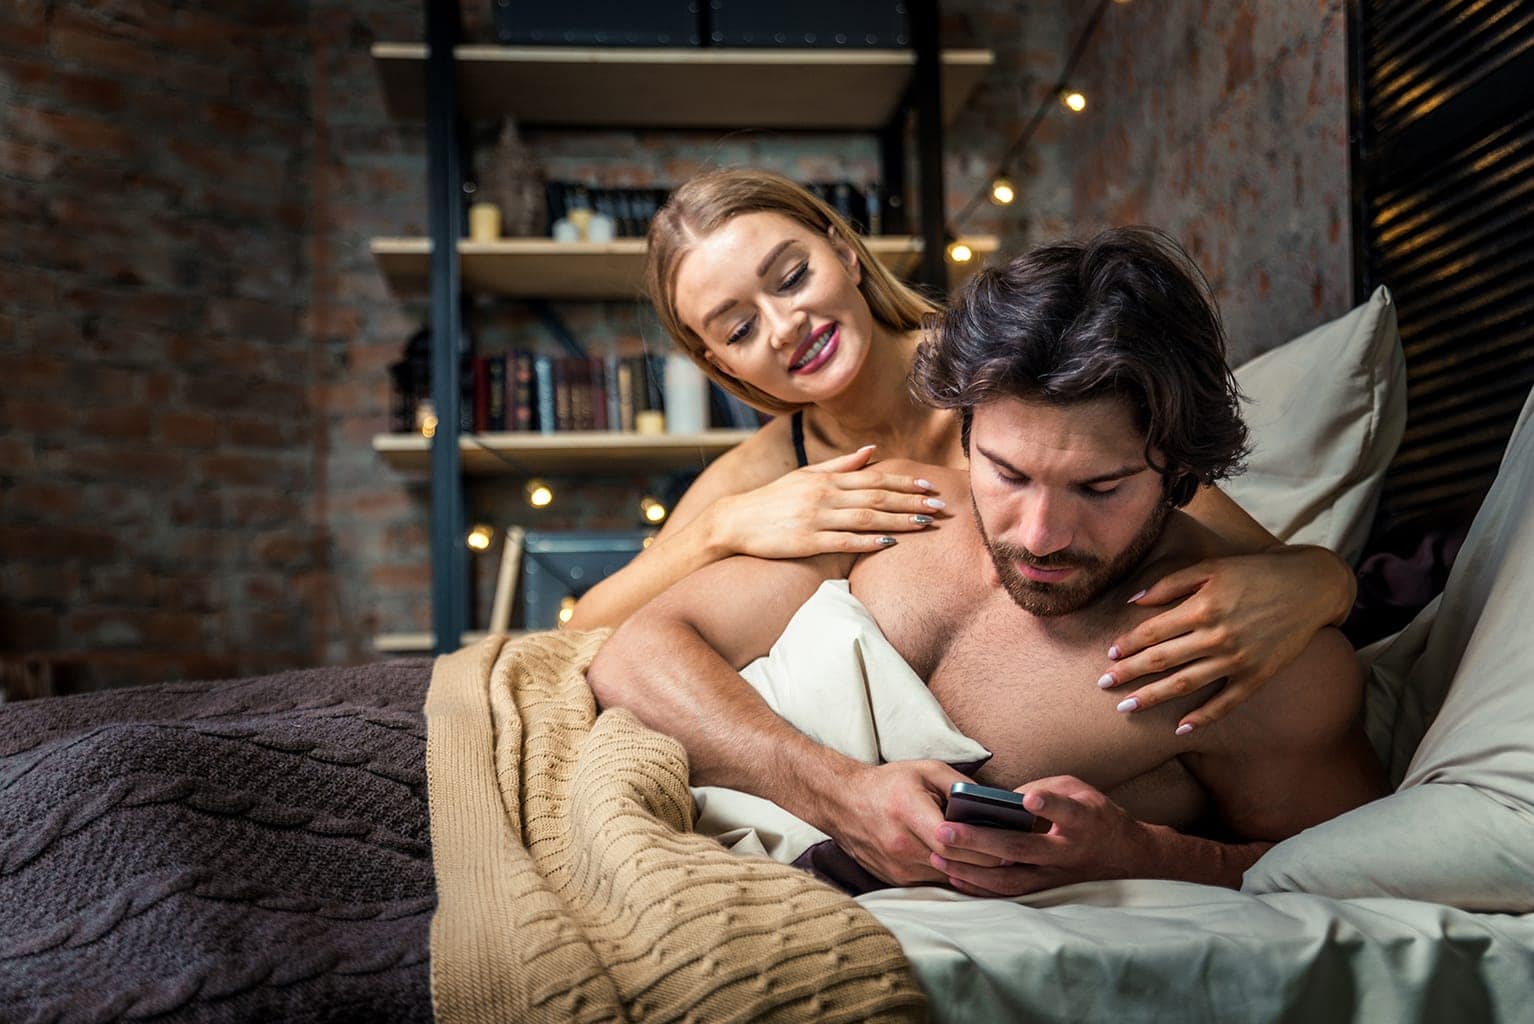 Couple in bed man cheating on phone